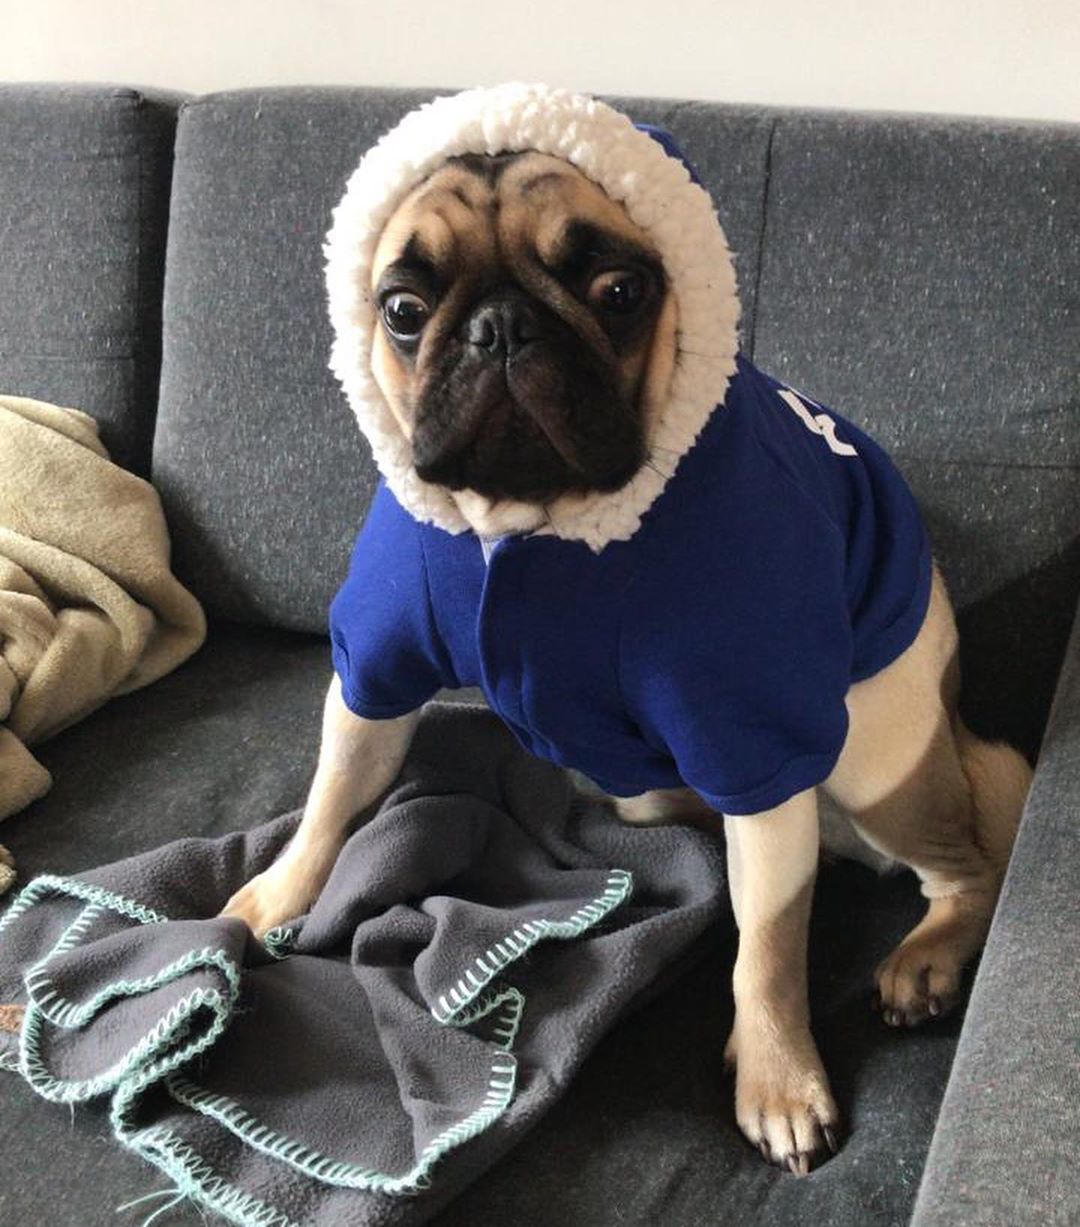 A Pug on the couch in its winter jacket